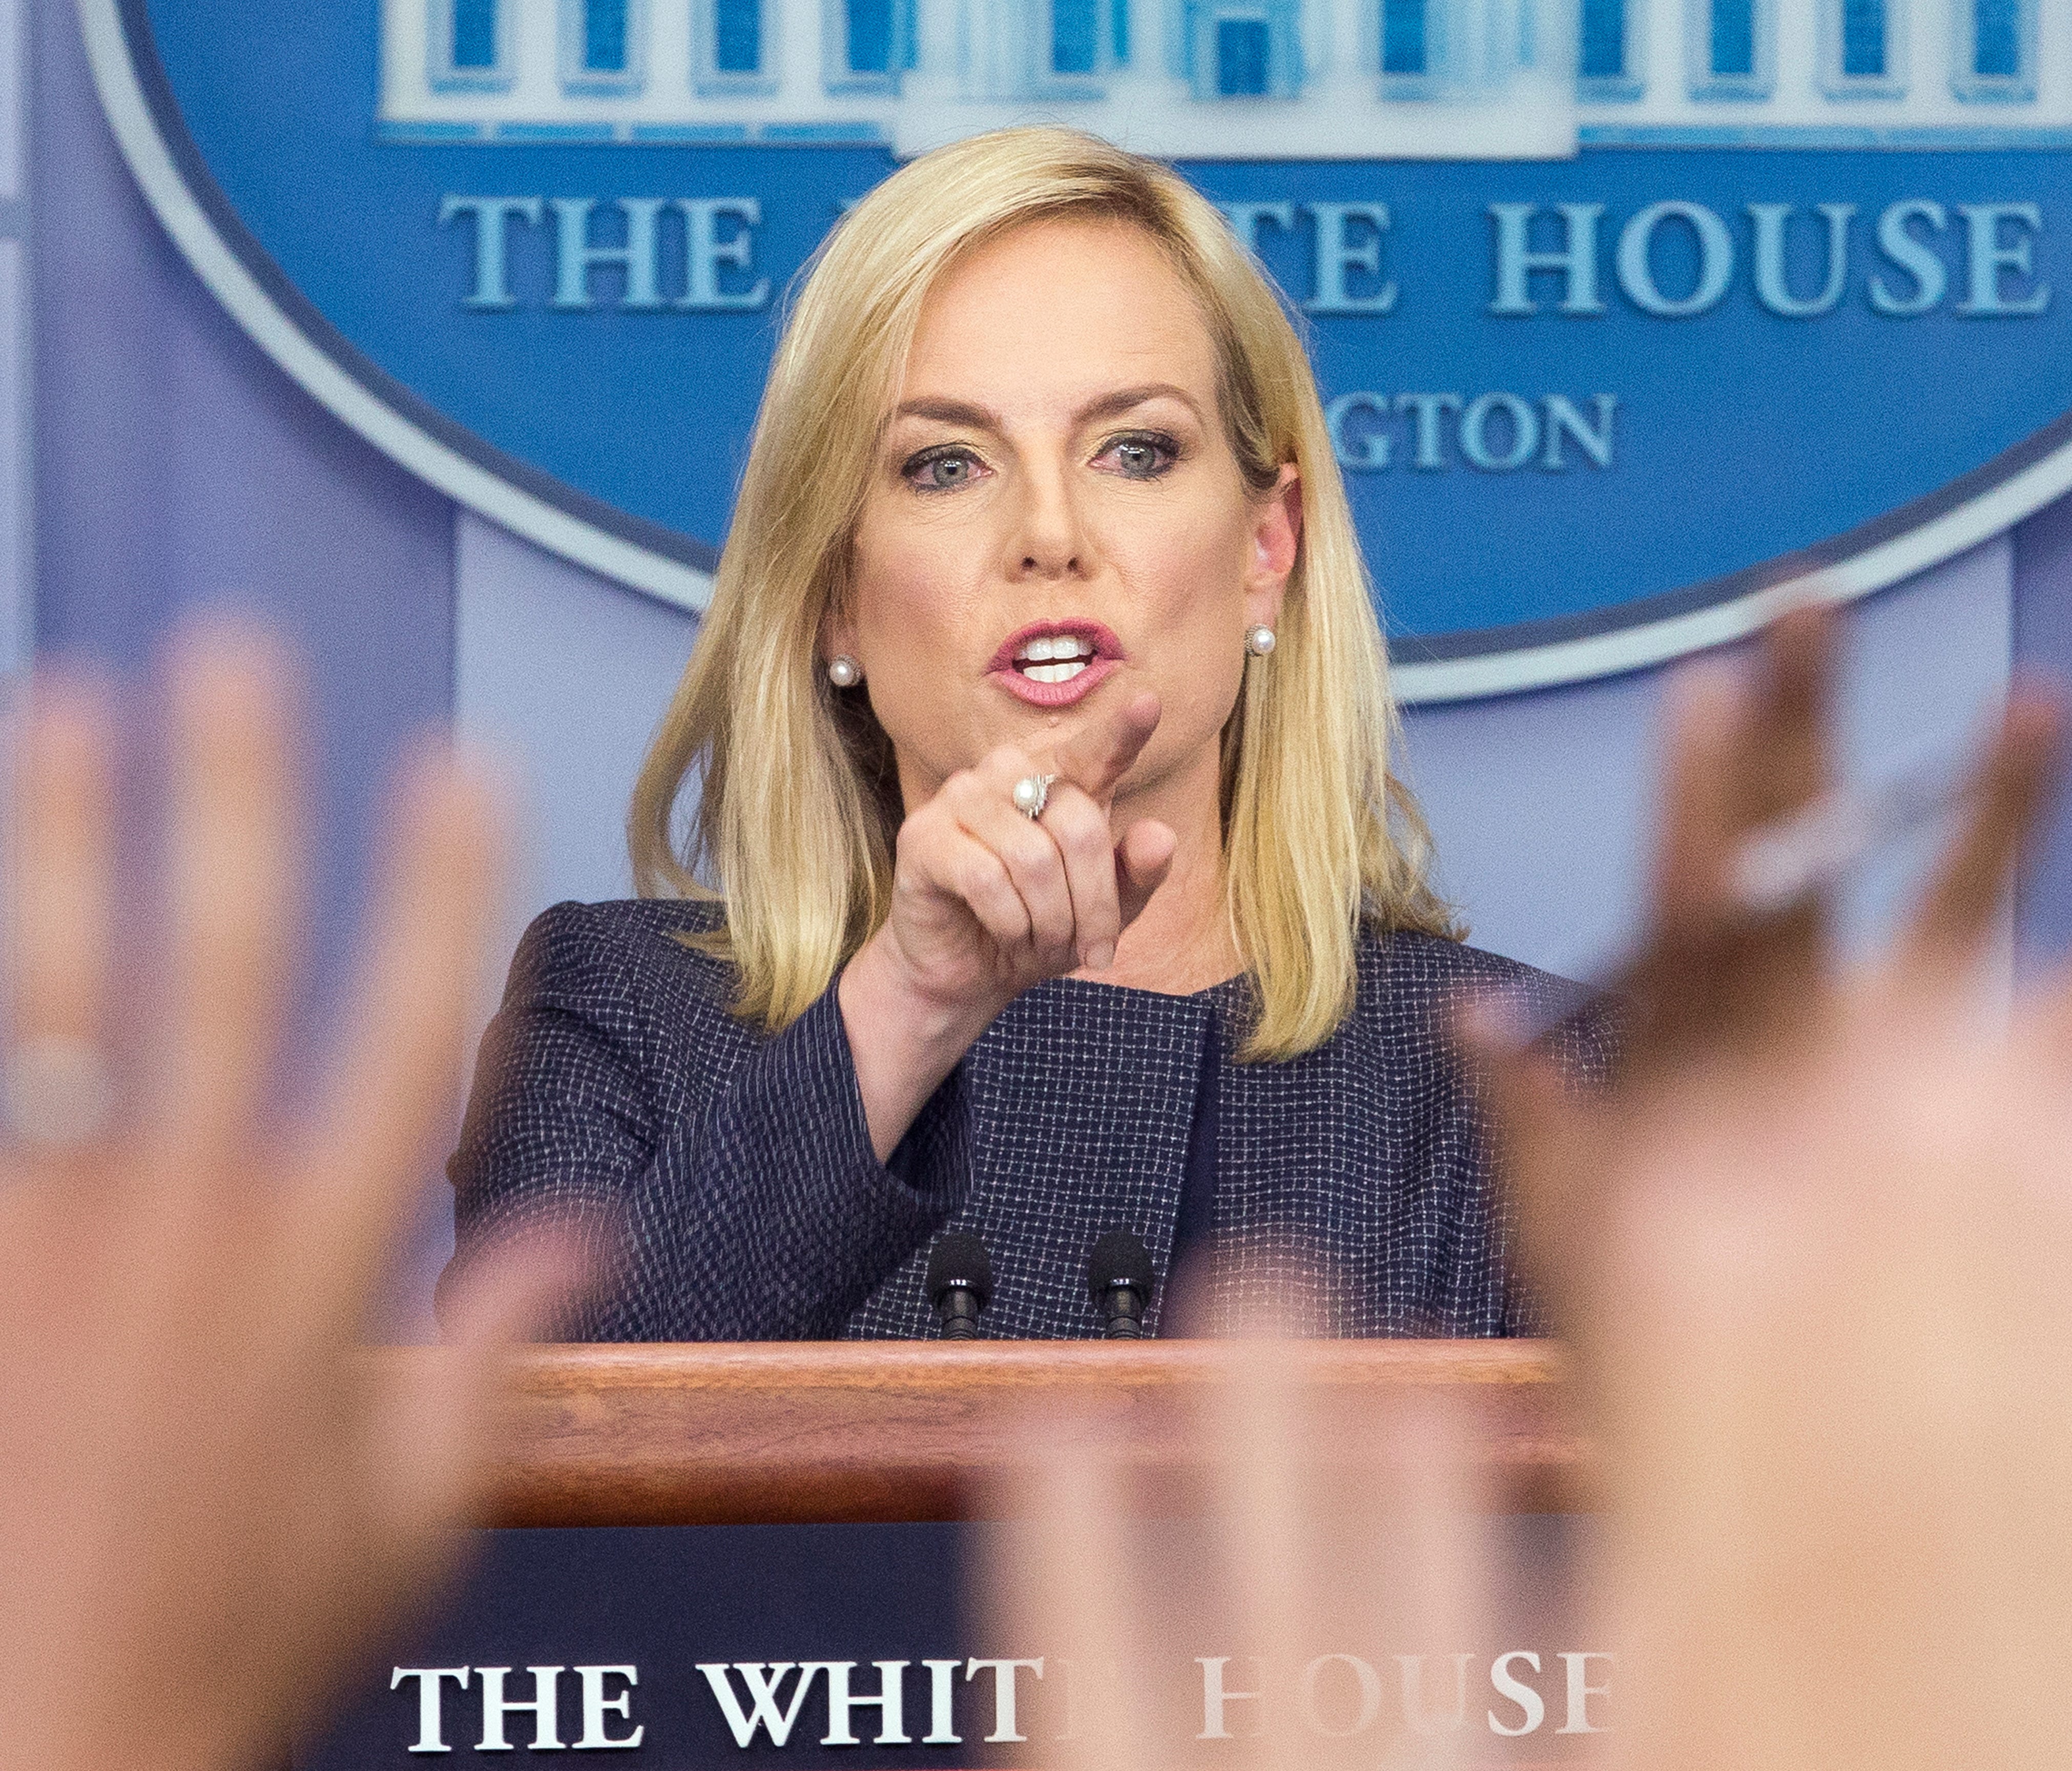 Department of Homeland Security Secretary Kirstjen Nielsen participates in a news conference at the White House in which she faced questions on the Trump administration's 